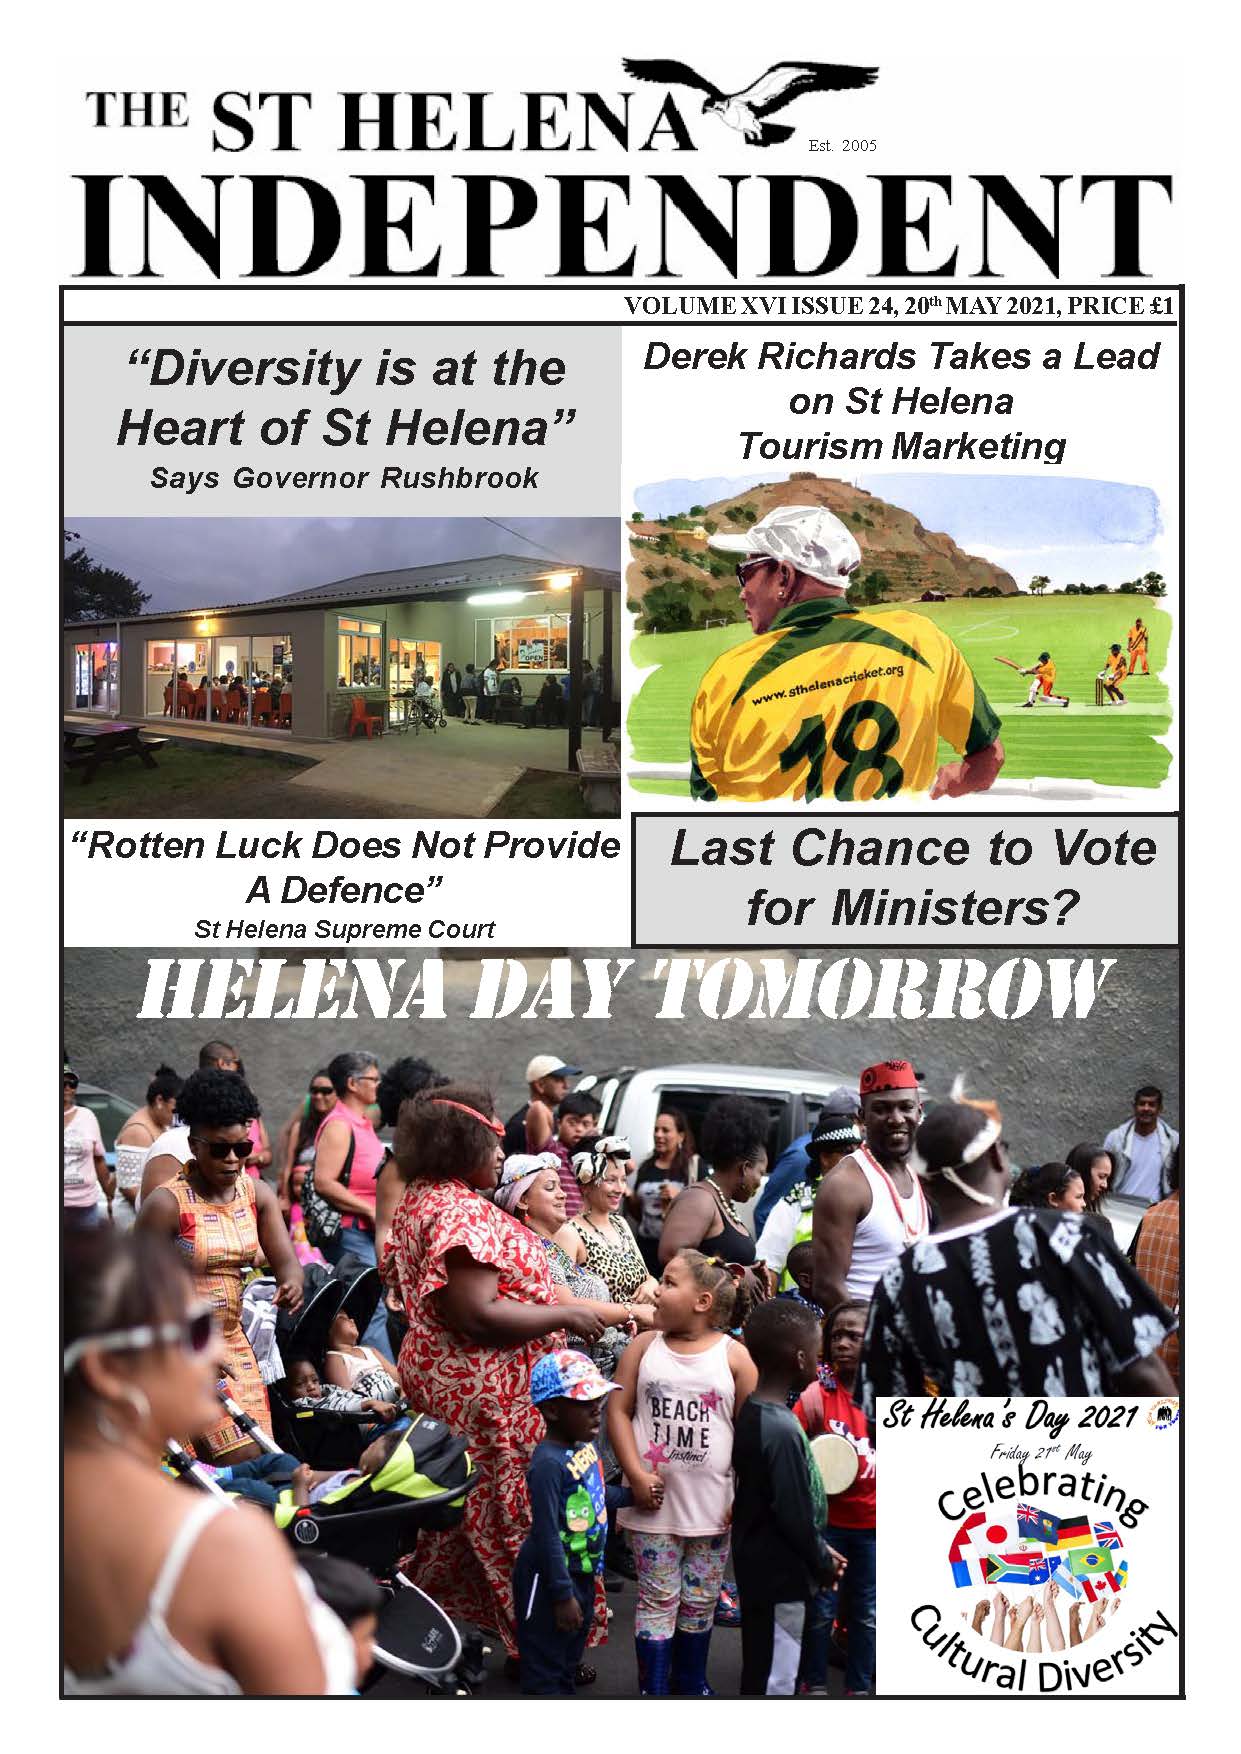 St Helena Independent 20210520 p1